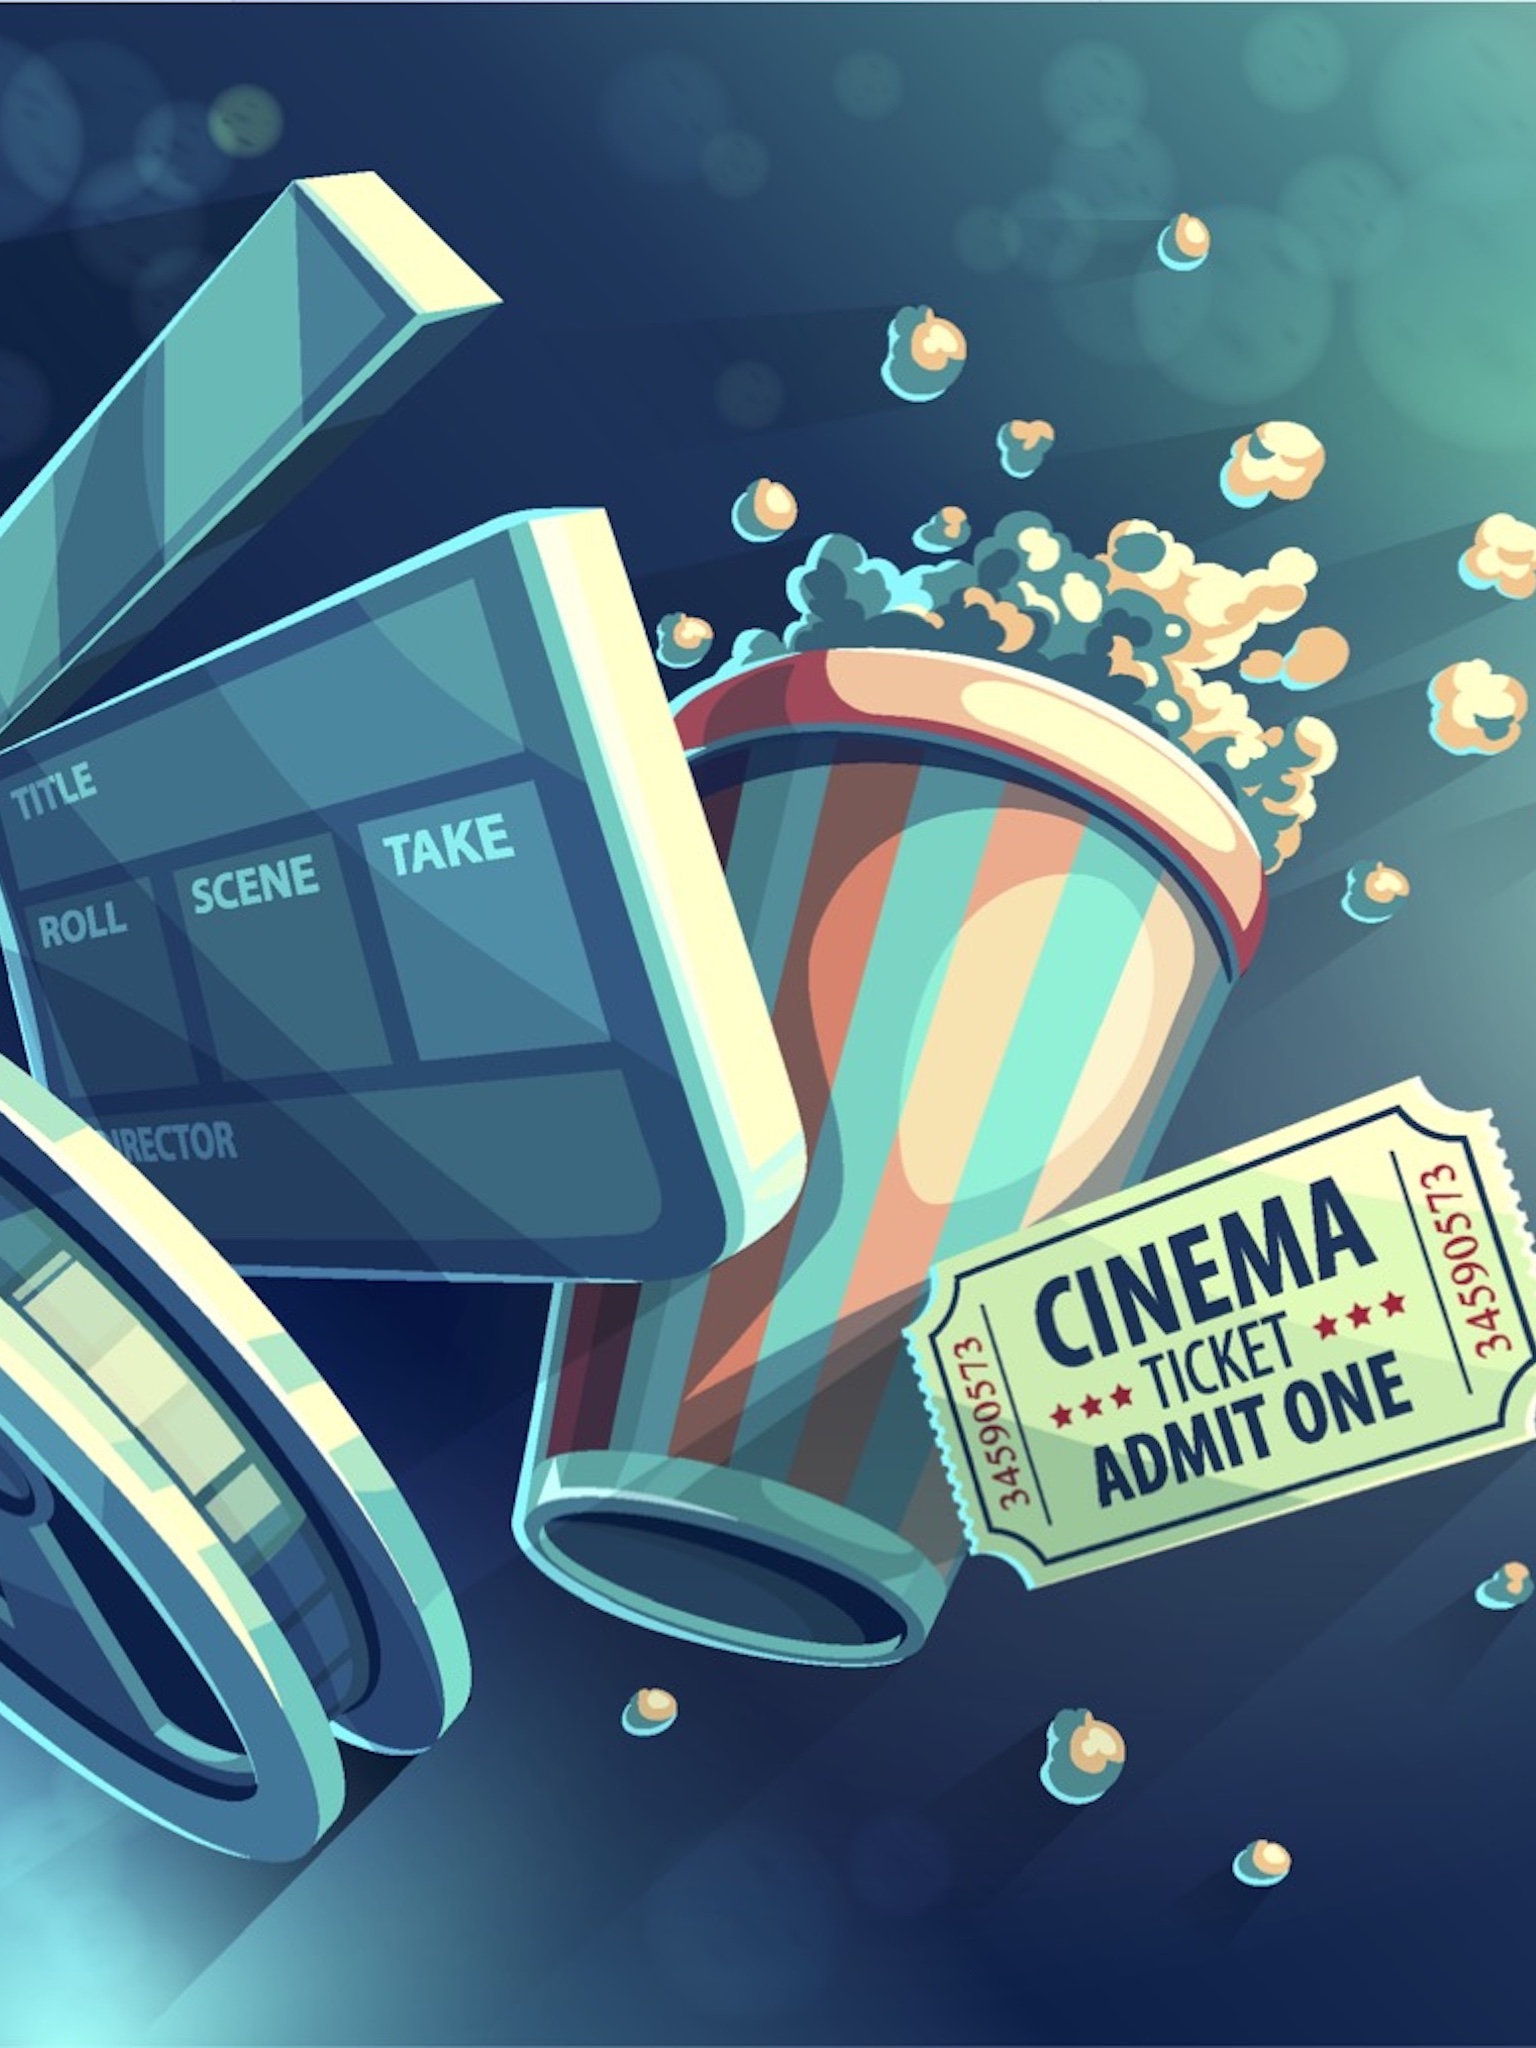 Product update: Theatrical Content Testing